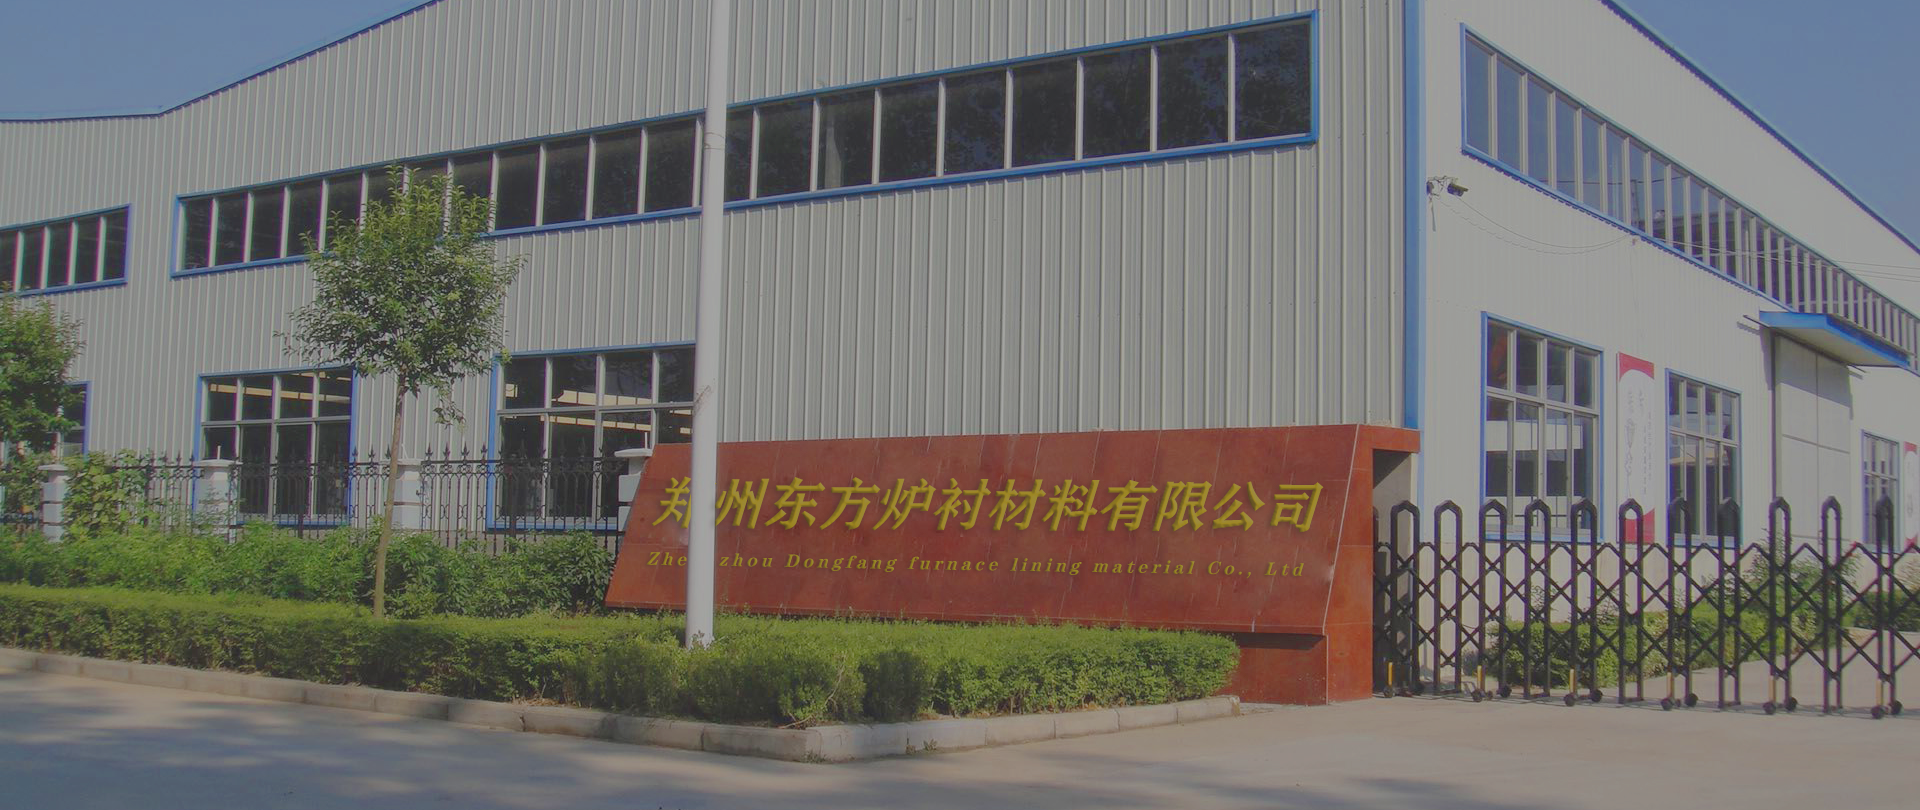 Bricks Insulation, Refractory Insulation Materials, Concrete Refractory -  Dongfang